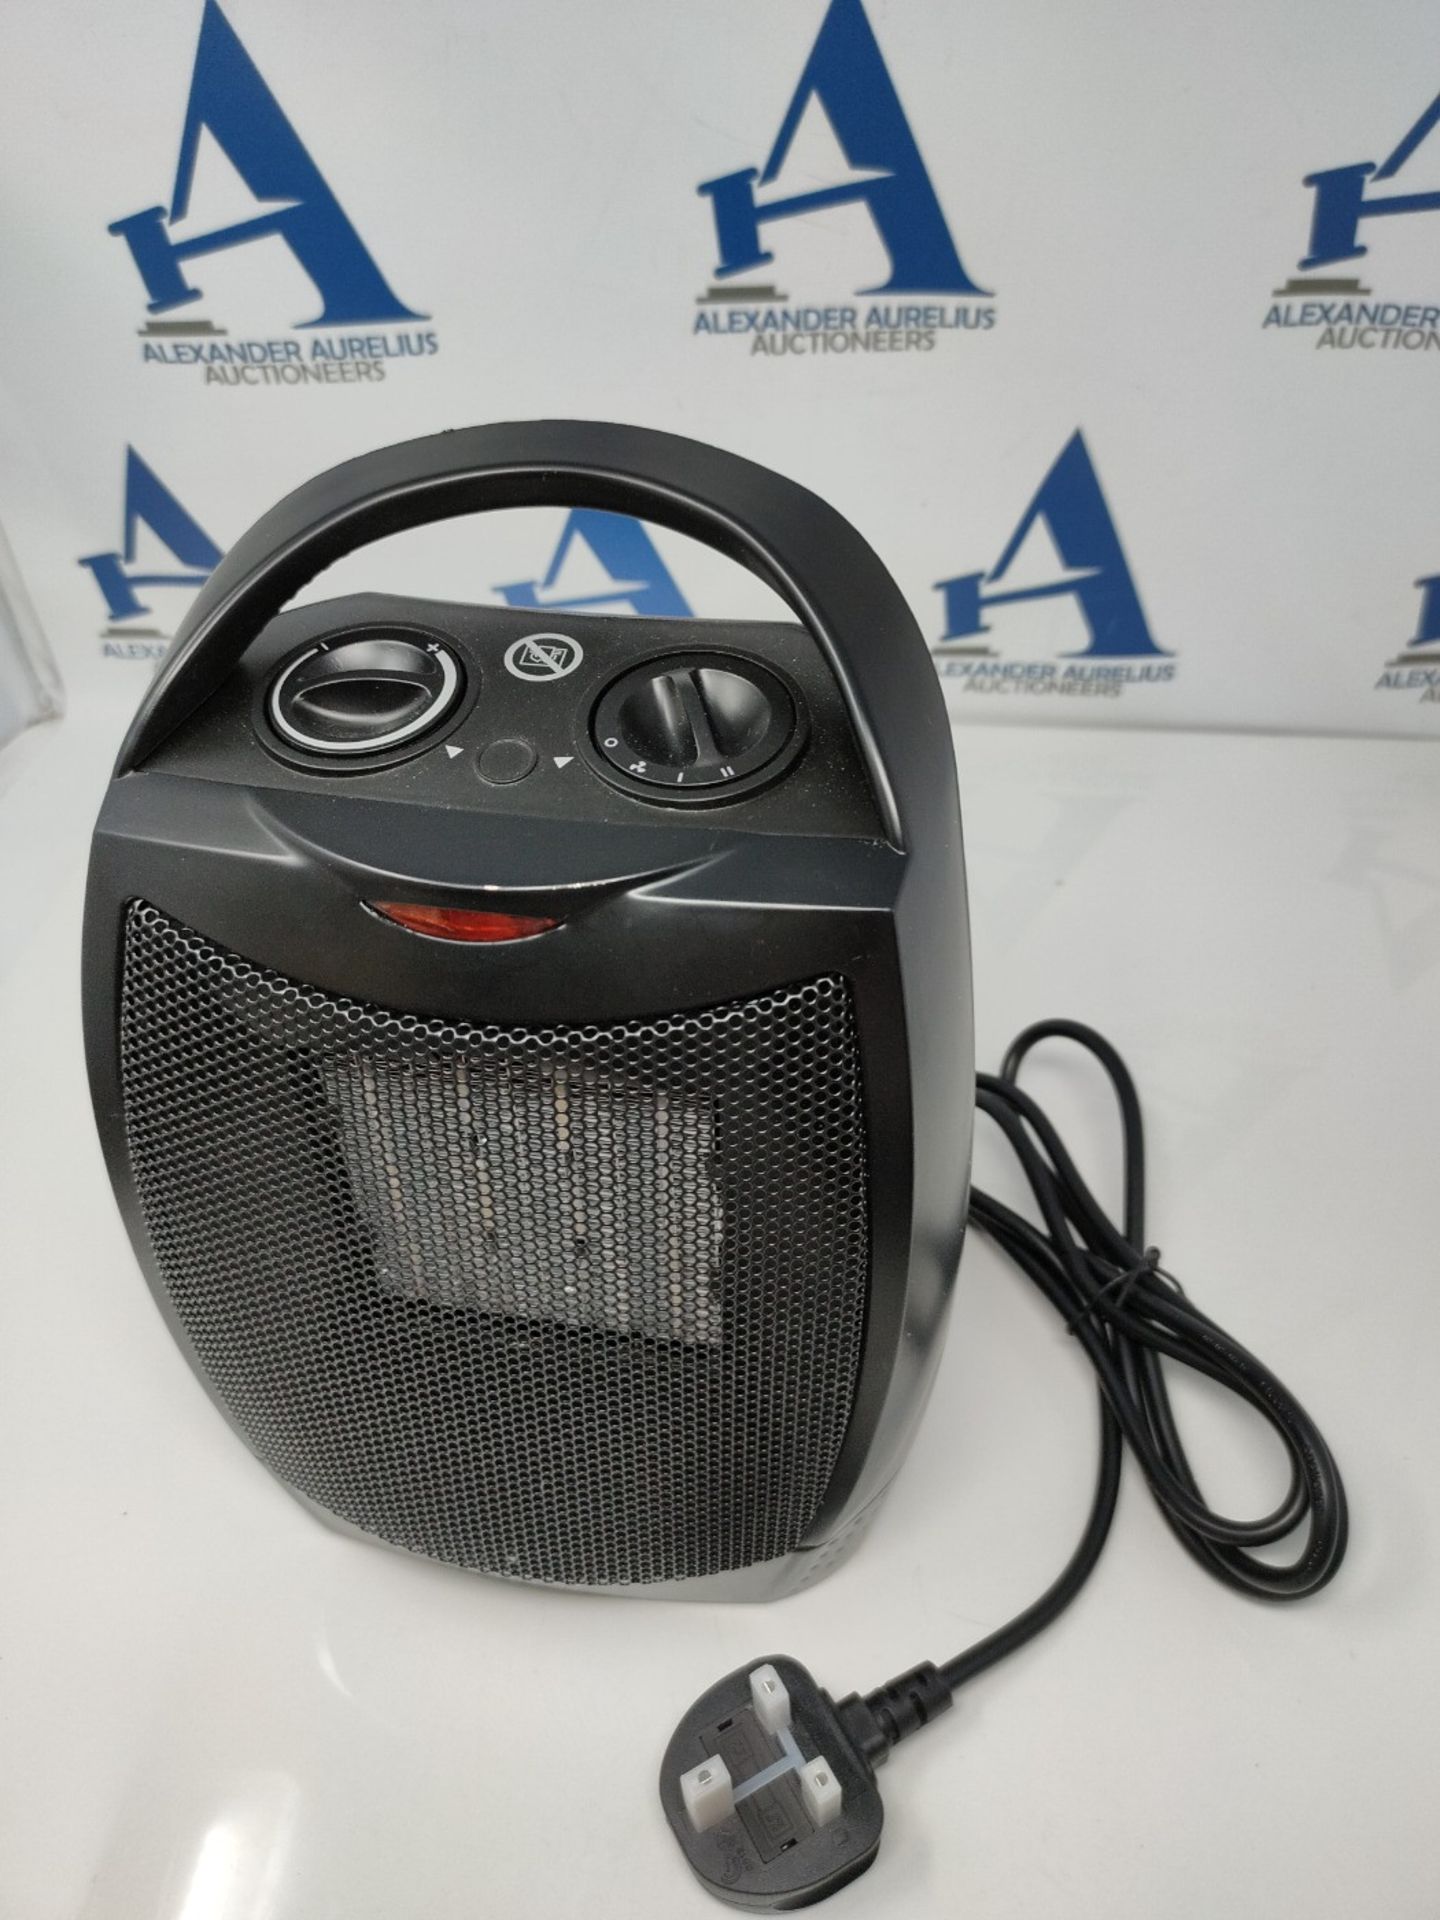 Russell Hobbs 1500W/1.5KW Electric Heater in Black PTC Ceramic Heater, Portable Uprigh - Image 3 of 3